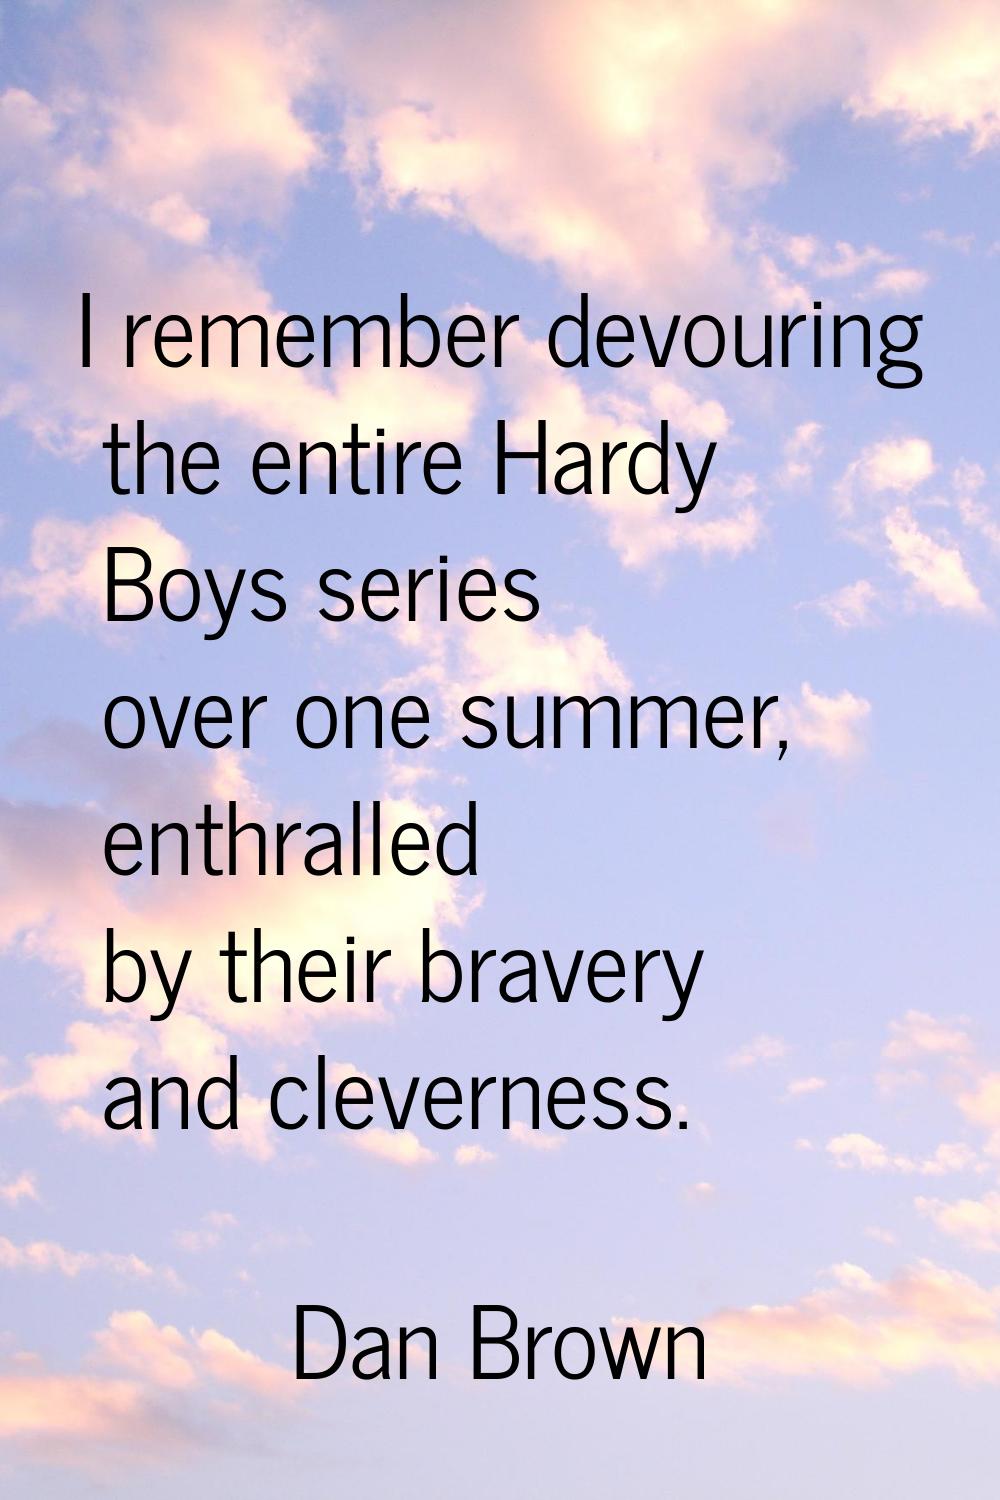 I remember devouring the entire Hardy Boys series over one summer, enthralled by their bravery and 